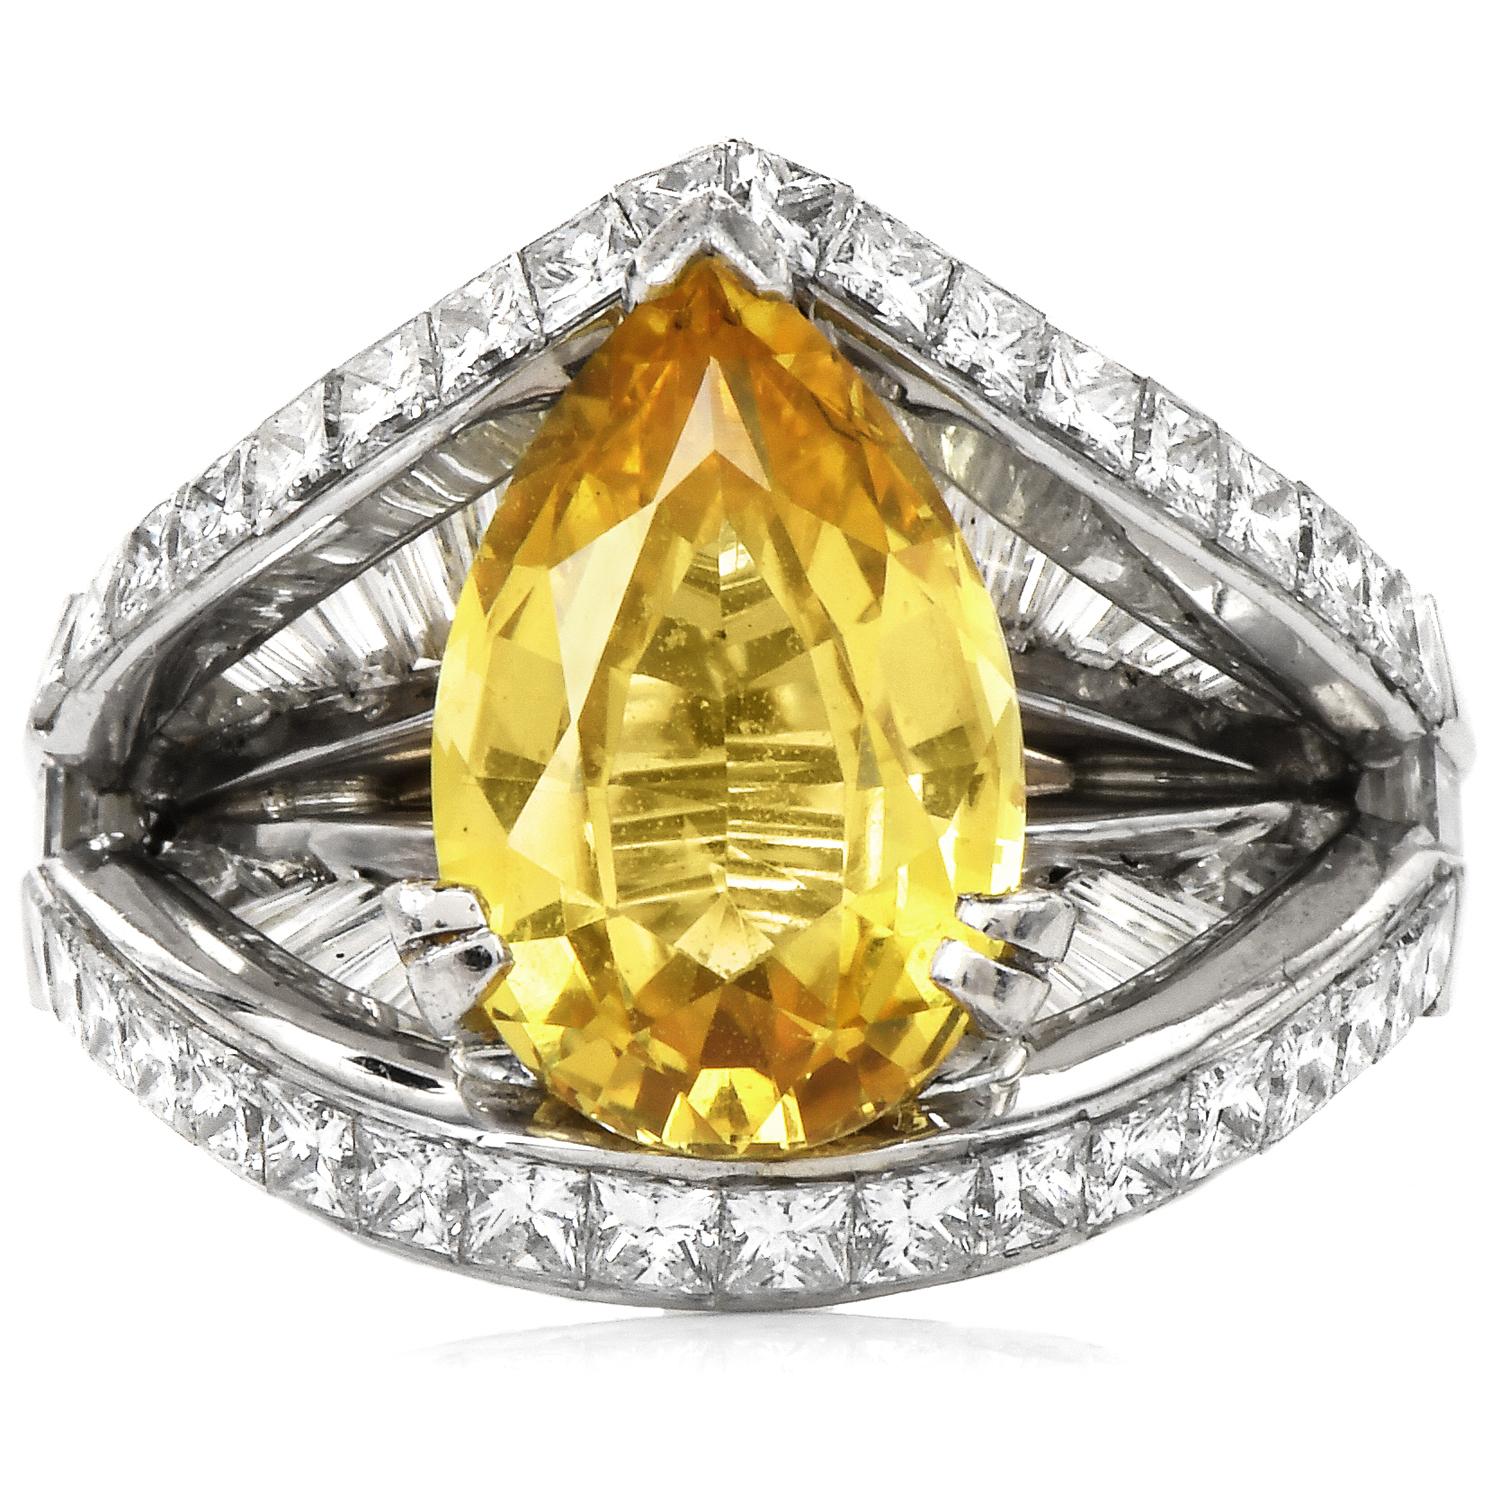 This exquisite GIA Certified 4.96cts Vivid Yellow Sapphire Ring has a No Heat Sapphire in the center.

Adorned in the sides by a mirror-like open design, with many genuine Diamonds.

Crafted in solid Platinum.

(12) baguettes, channel set on the